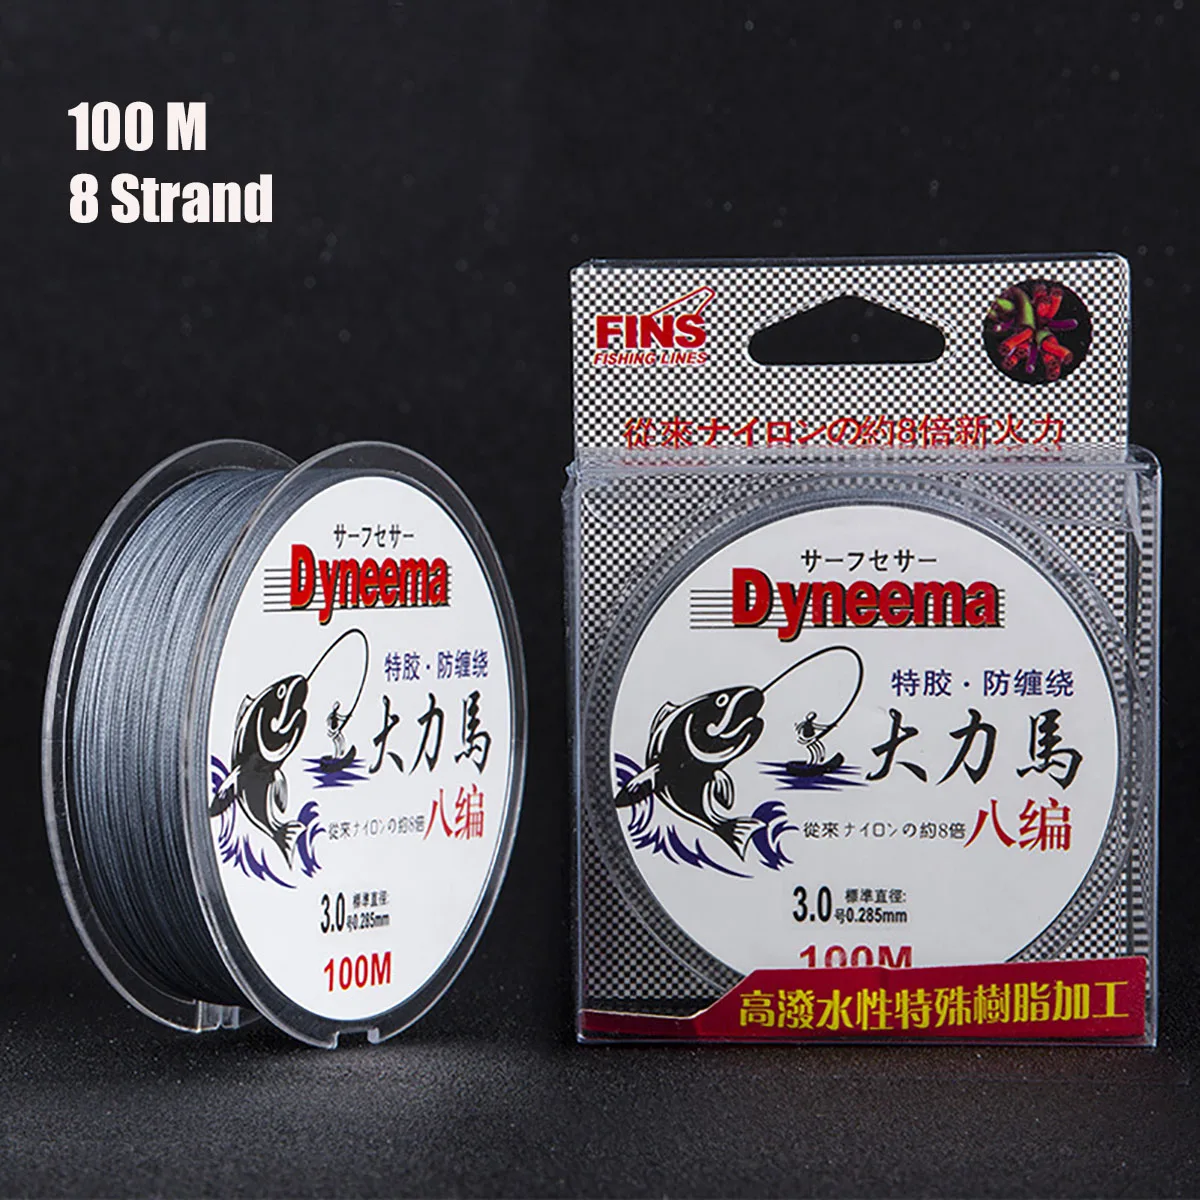 Enlarge Super Power Braided Fishing Line - 8 Strands Abrasion Resistant Braided Lines, Zero Stretch,100% PE, 100M